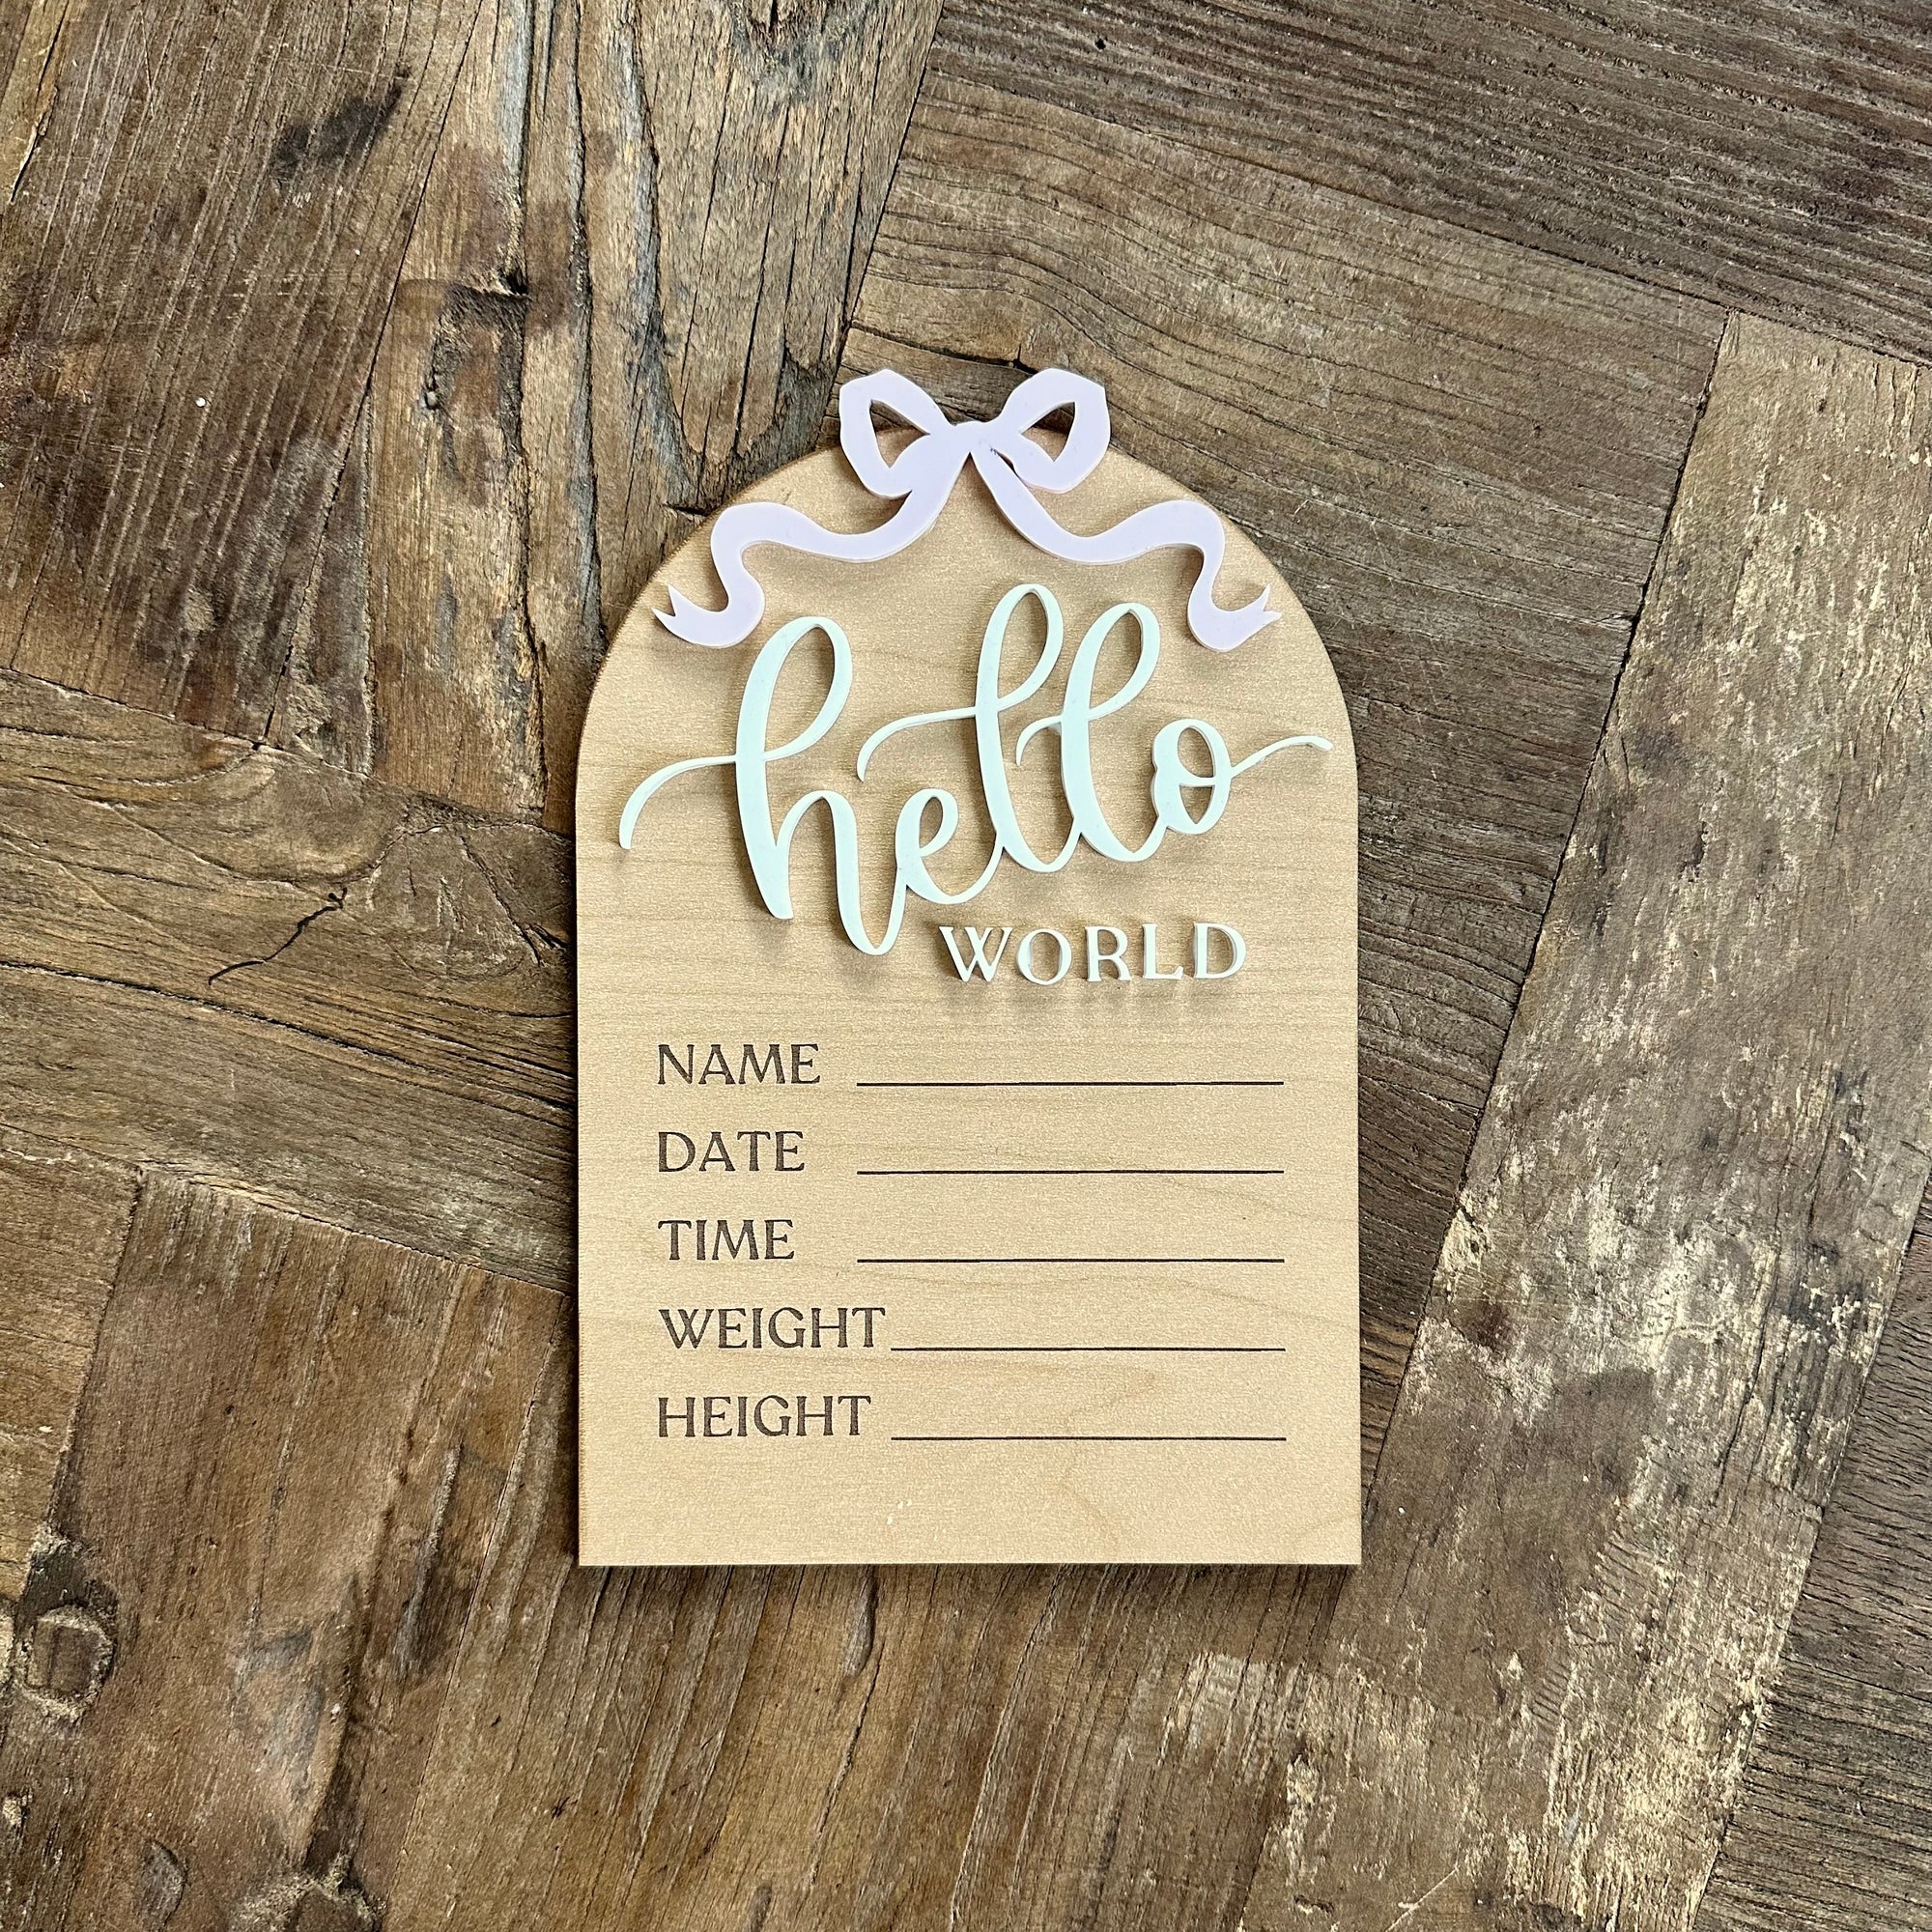 Hello World Bow Wooden Arched Statistic Sign